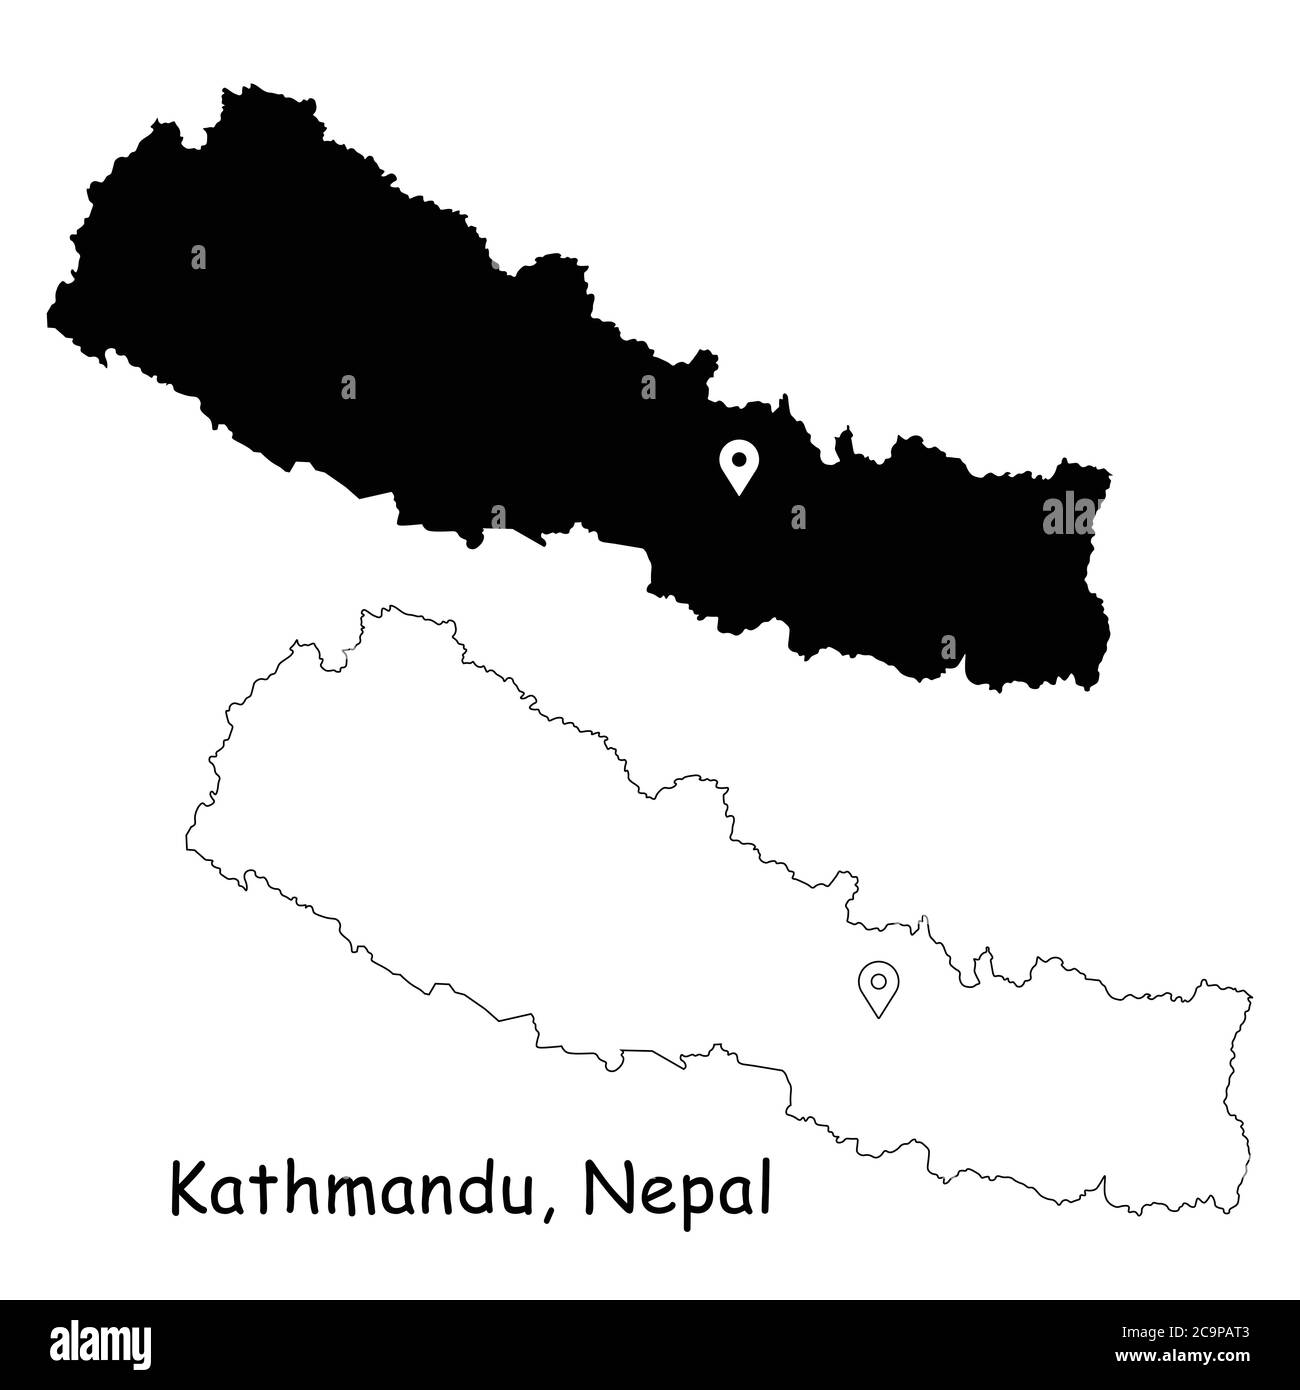 Kathmandu, Federal Democratic Republic of Nepal. Detailed Country Map with Location Pin on Capital City. Black silhouette and outline maps isolated on Stock Vector